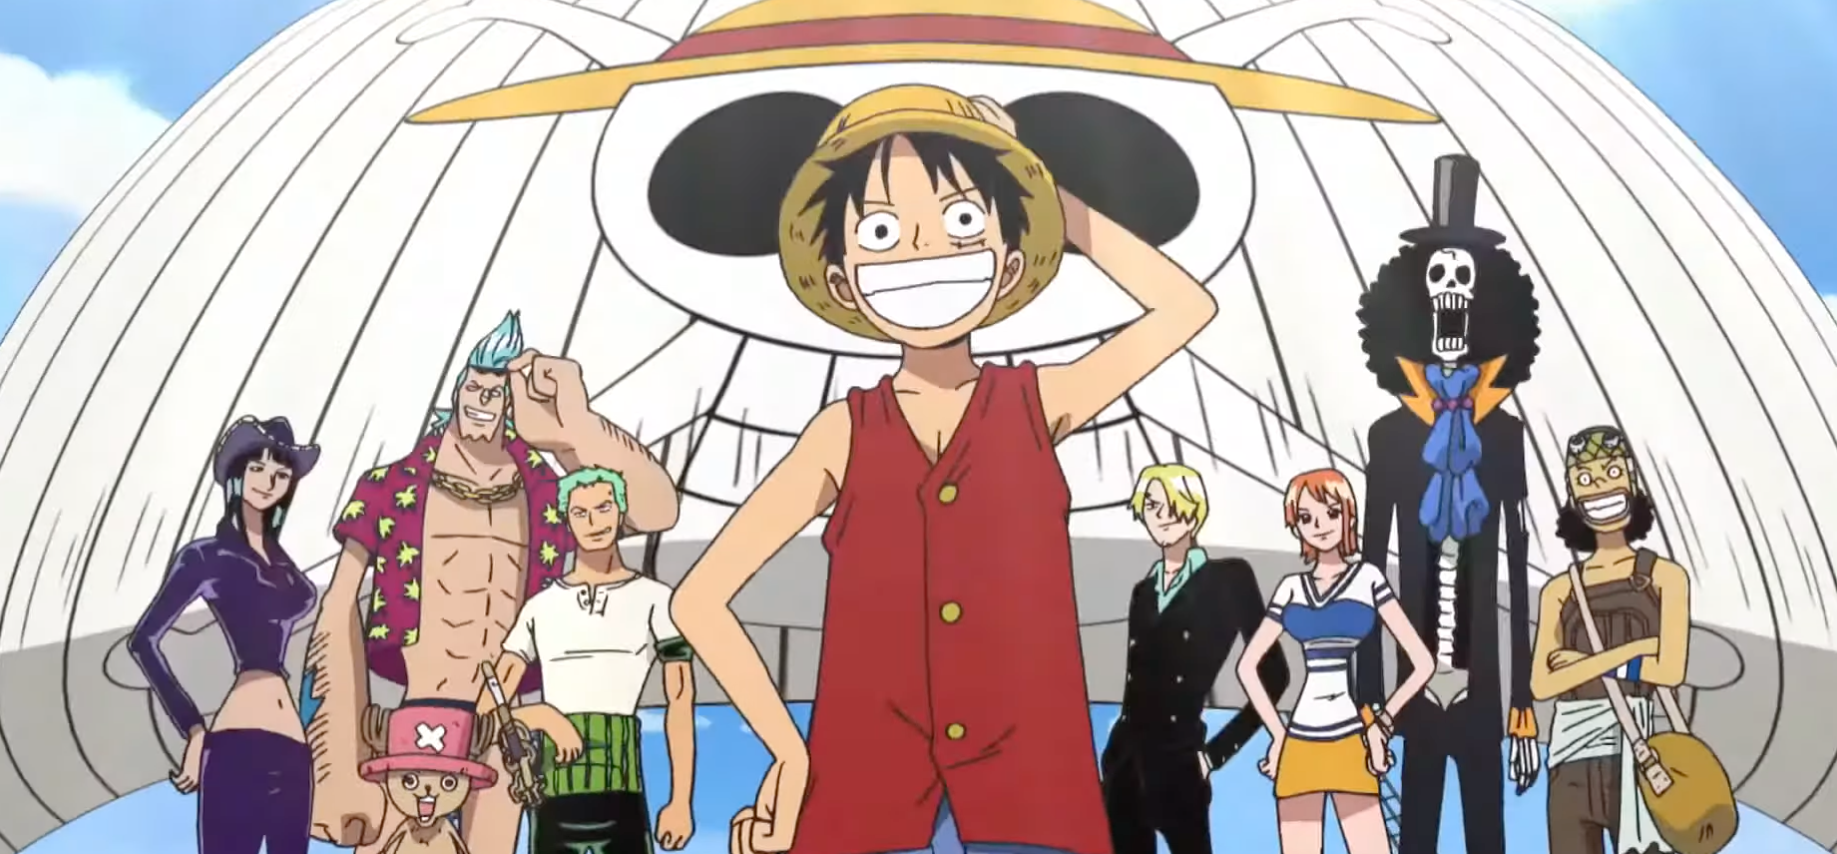 One Piece's Live-Action Series Gets 10-Episode Order from Netflix